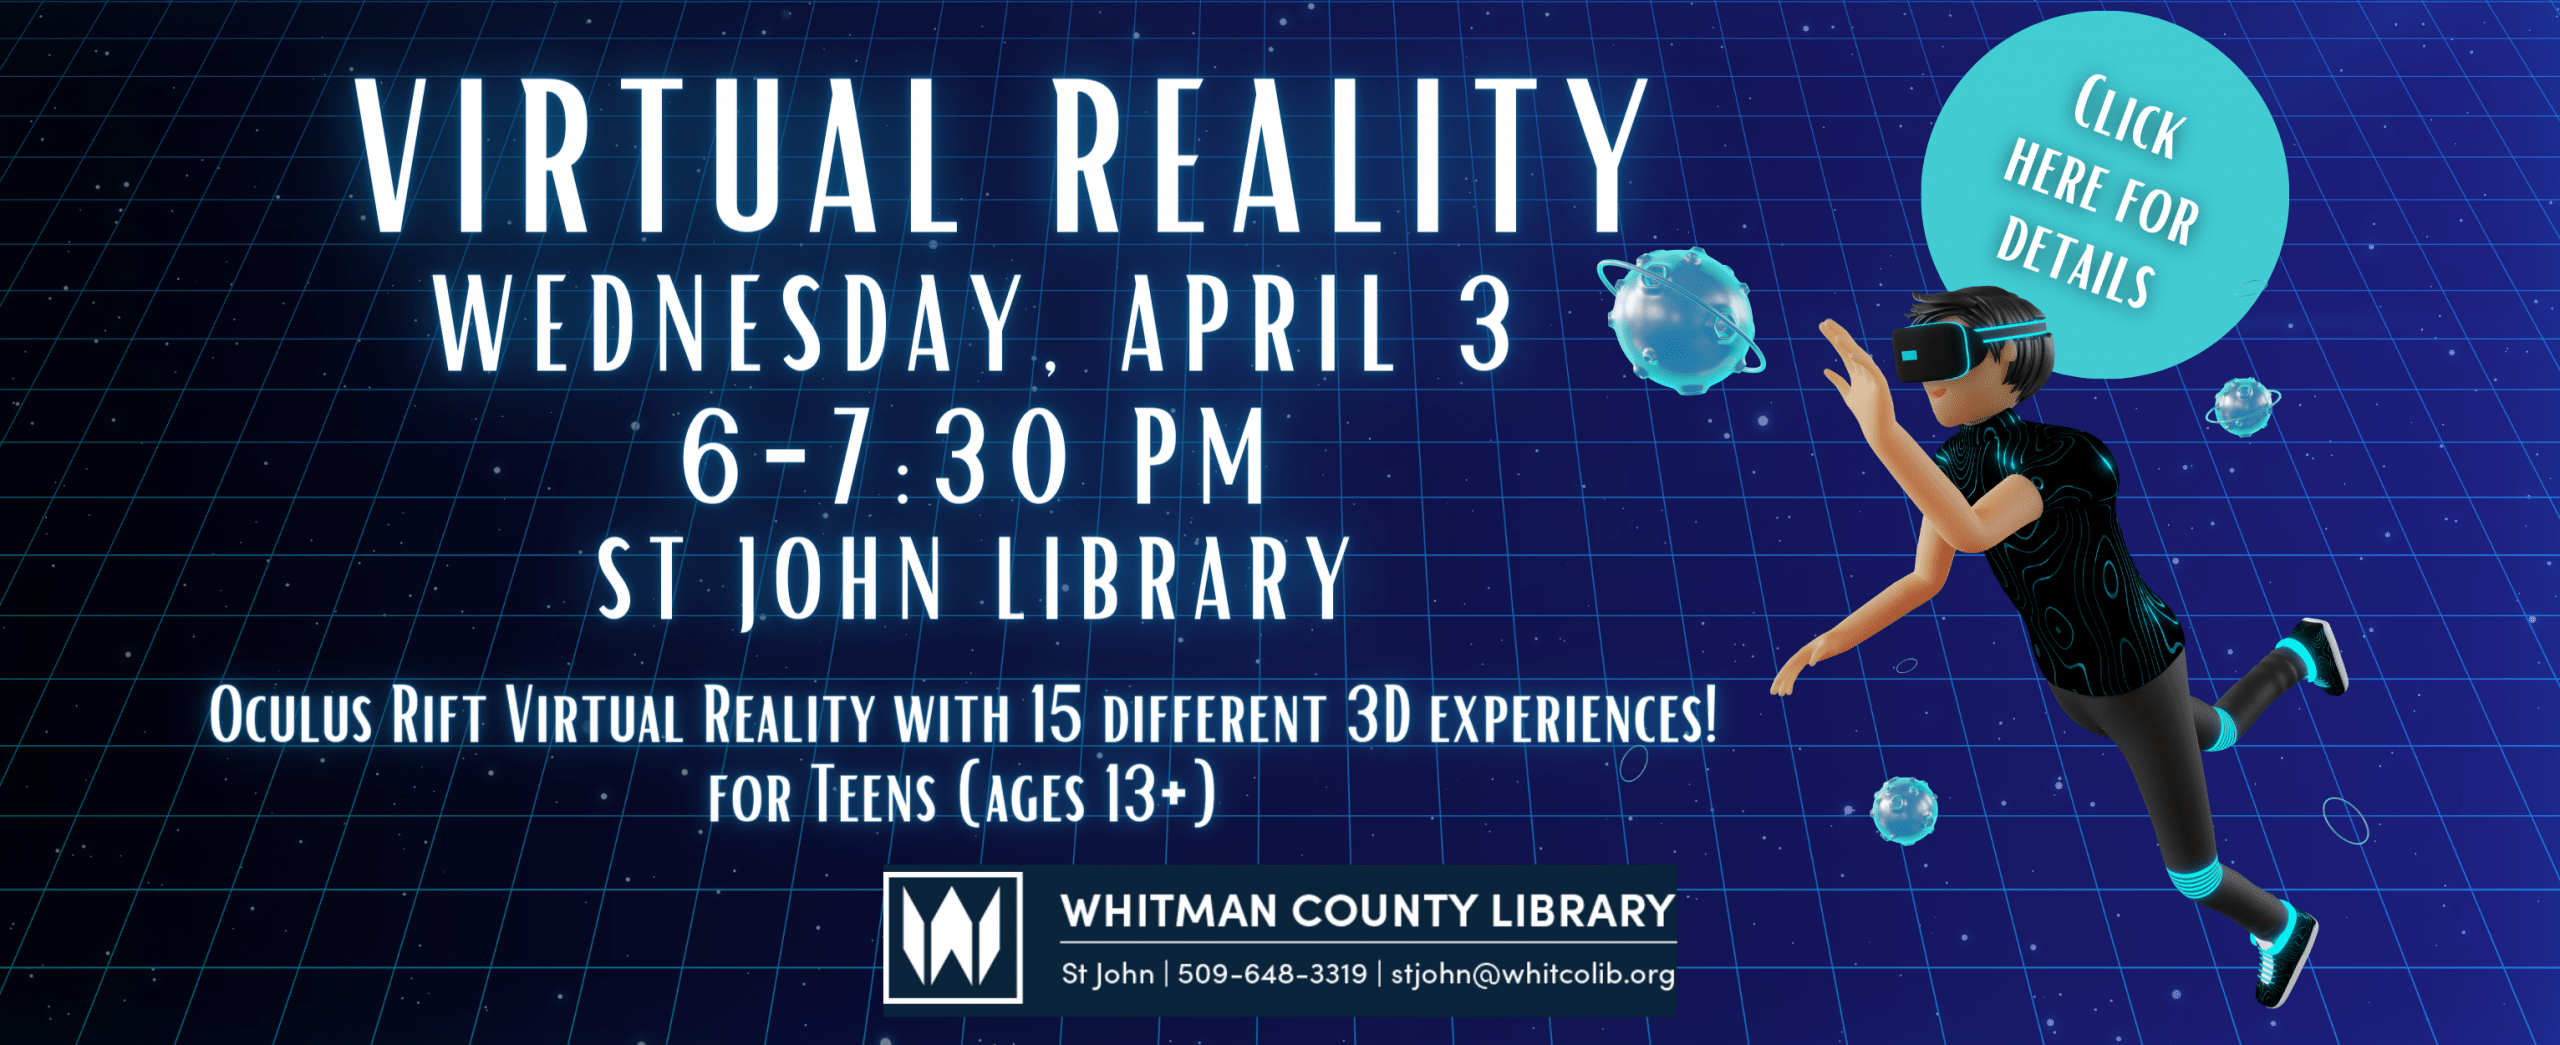 Teens ages 13+ are invited to the St. John Library on Wednesday, April 3 from 6-7:30 PM for Virtual Reality! Click here for details.